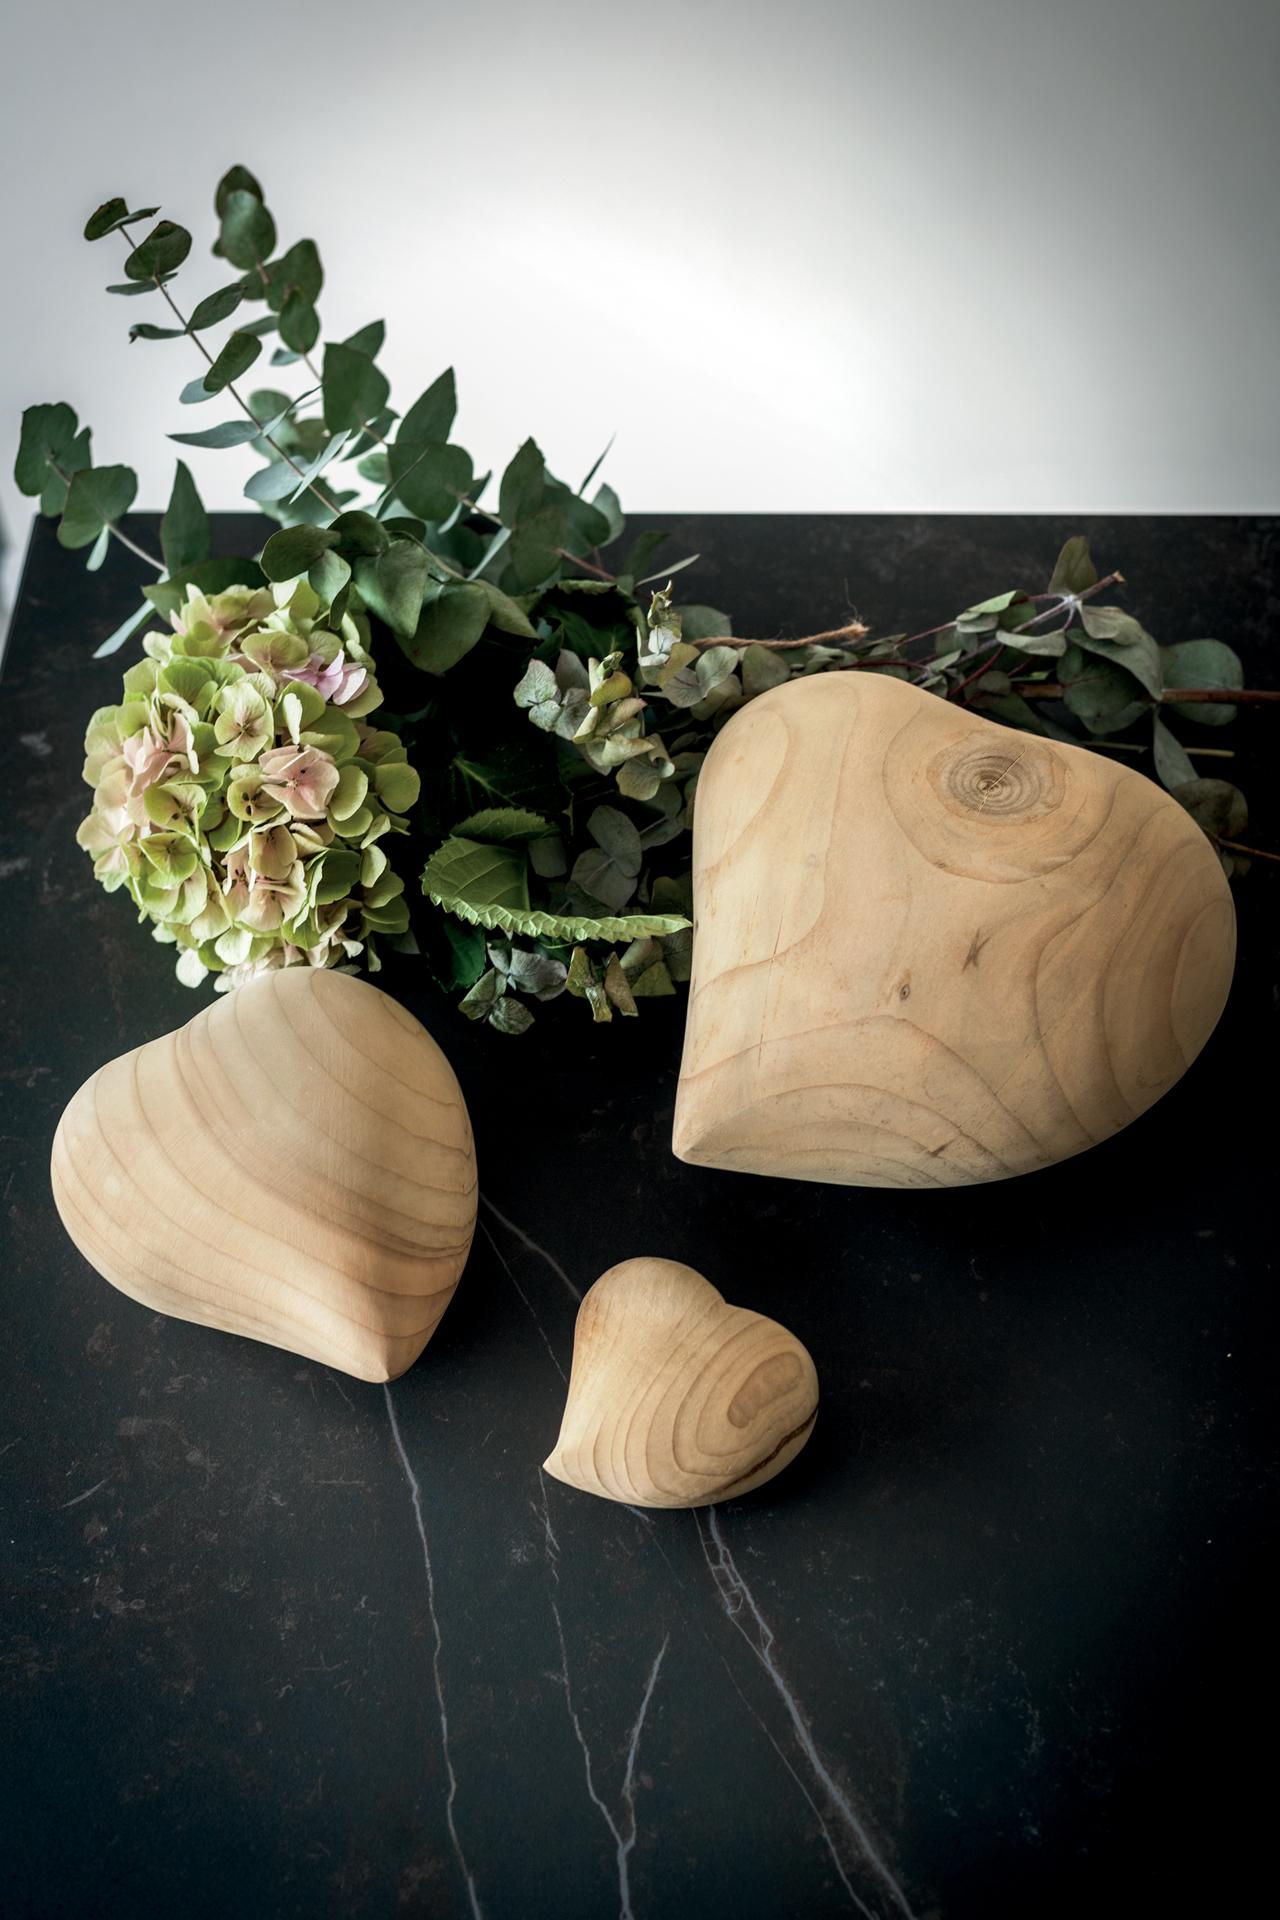 Italian In Stock in Los Angeles, Cuore Heart Cedar Wood Paperweight Small, Made in Italy For Sale